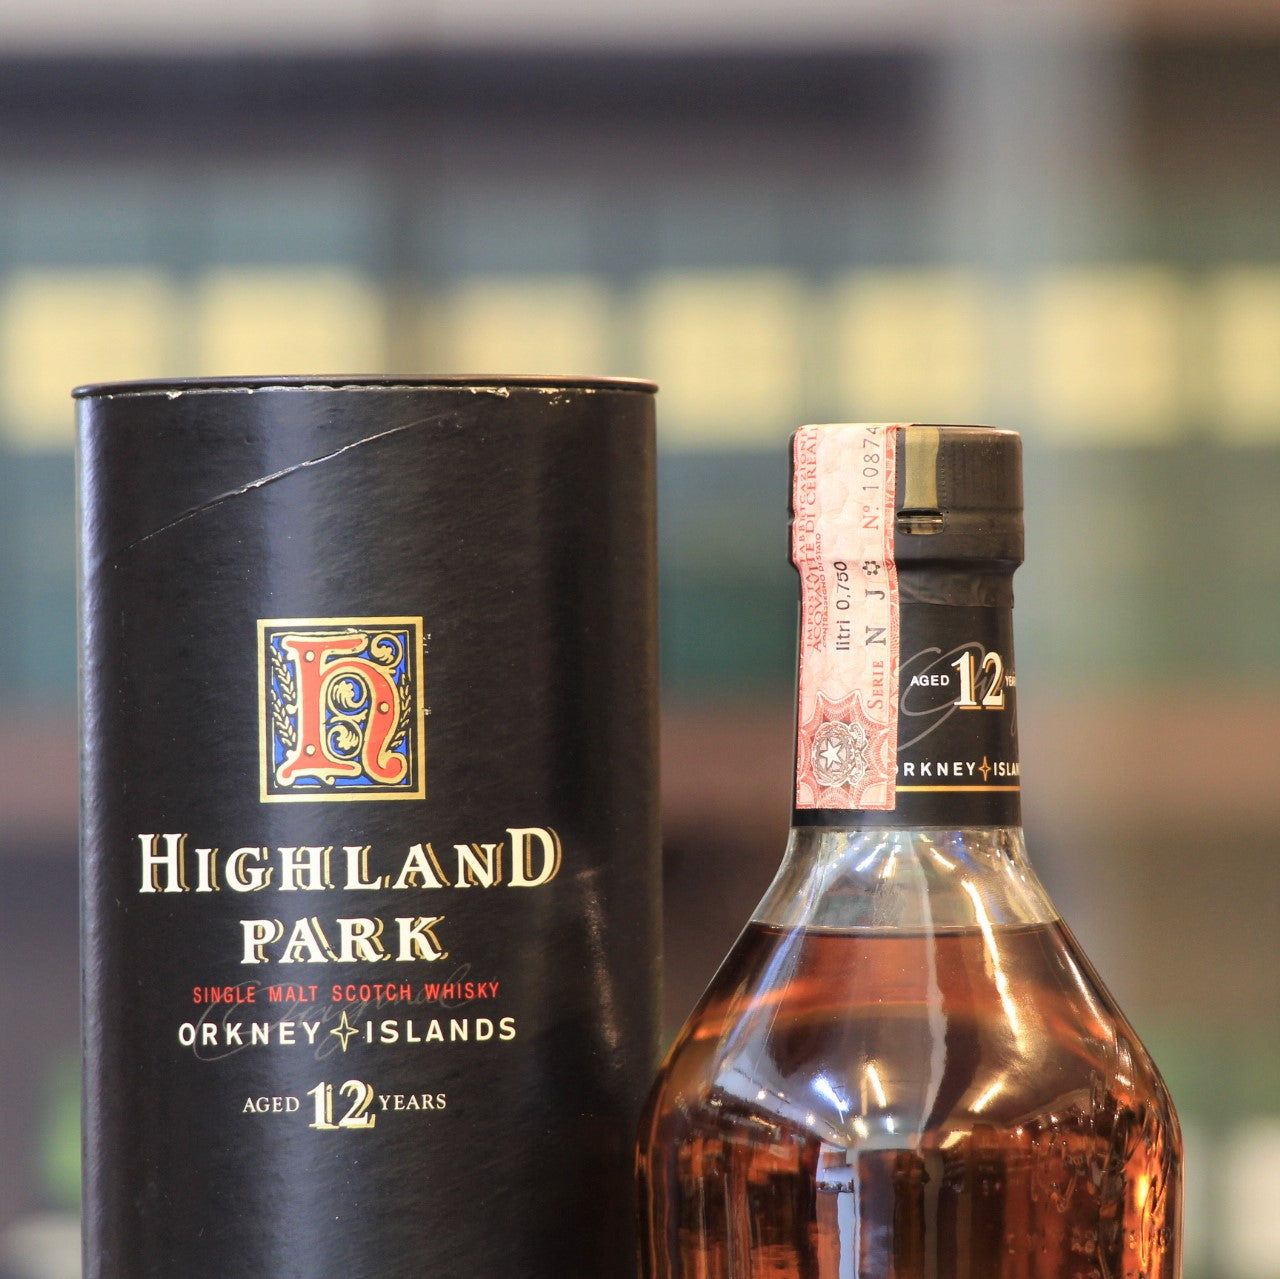 A 12 years old bottling from Highland Park bottled during the 1990s in a dumpy styled bottle and a paper label. A rare bottle to find. This old bottling is a unique balance of subtle smokiness and heather-honey sweetness. Whisky writer Michael Jackson had commented about these old Highland Park 12 year olds as 'The greatest all-rounder in the world of malt whisky'. This has been bottled at 43%.